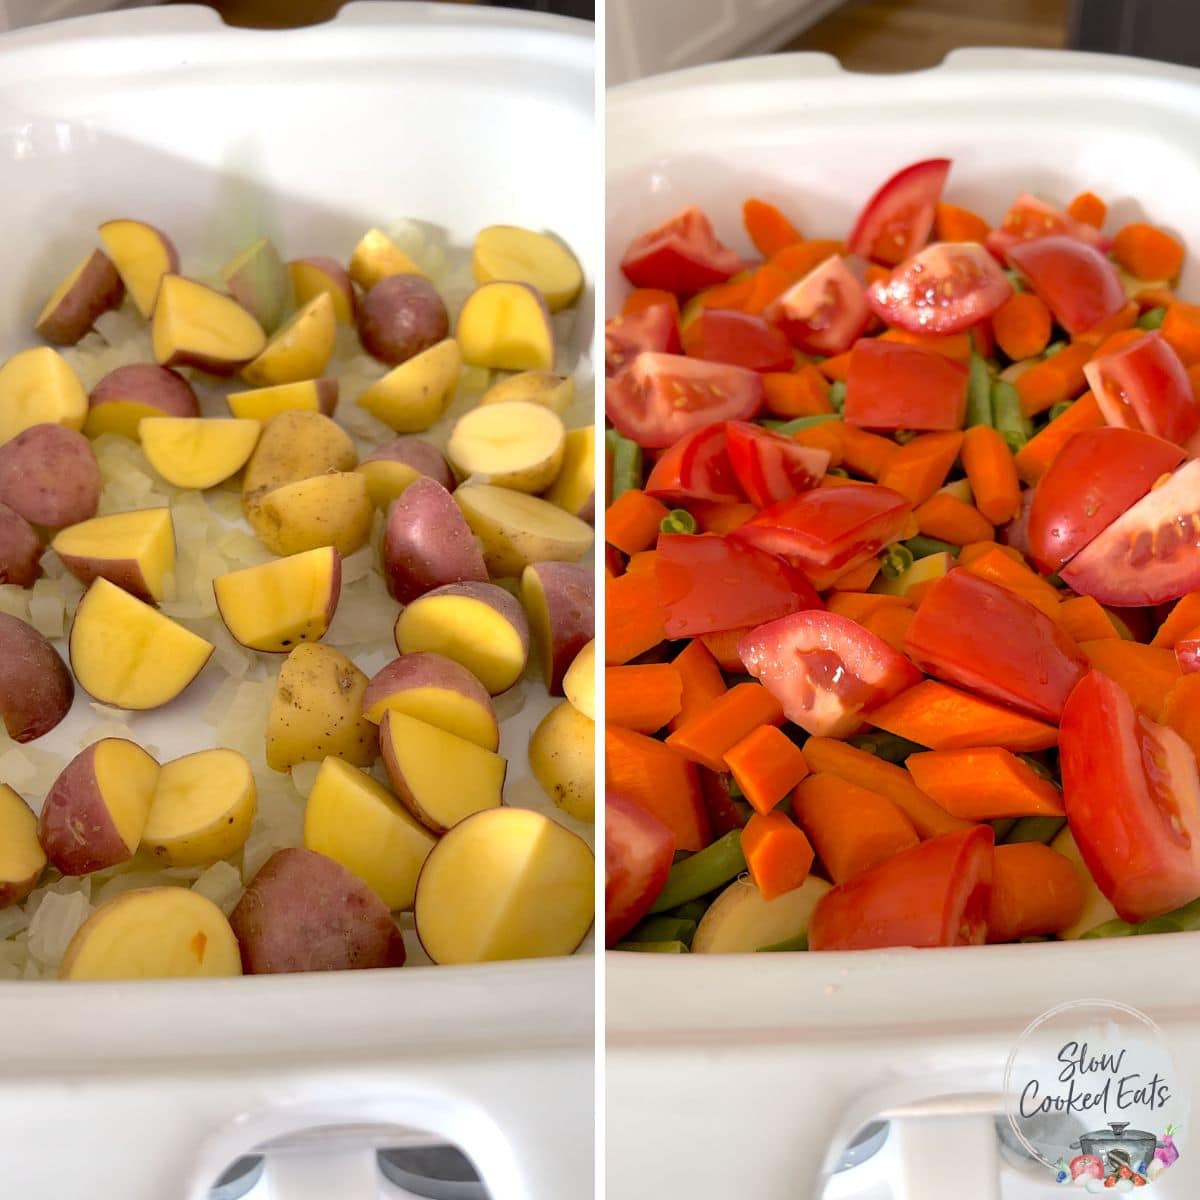 Layering the crockpot vegetables in a slow cooker.